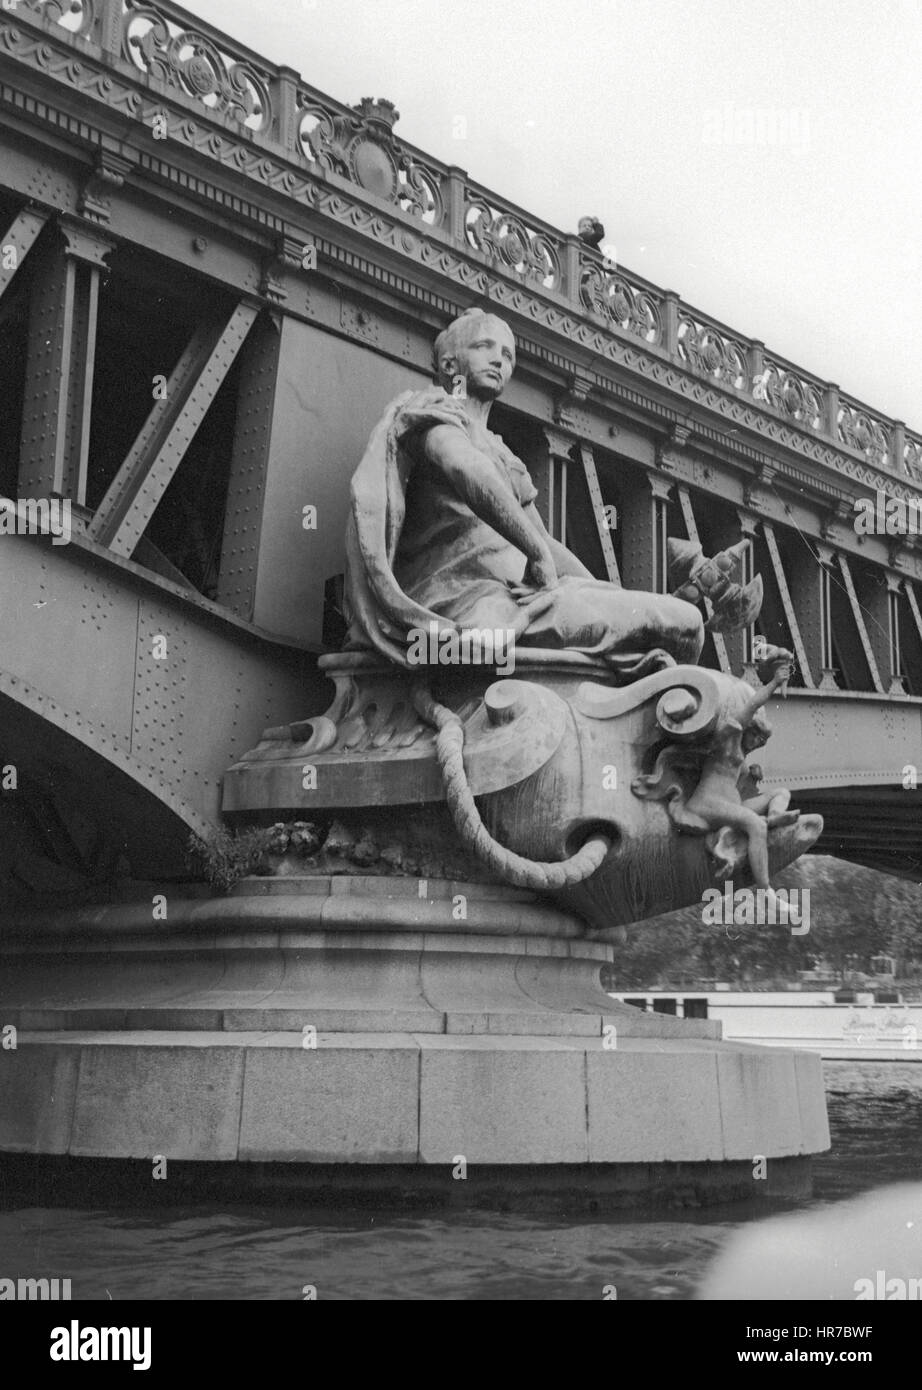 The Mirabeau Bridge over the Seine River feature bronze sculptures on the piles. This figure on the right bank is The City of Paris. Stock Photo